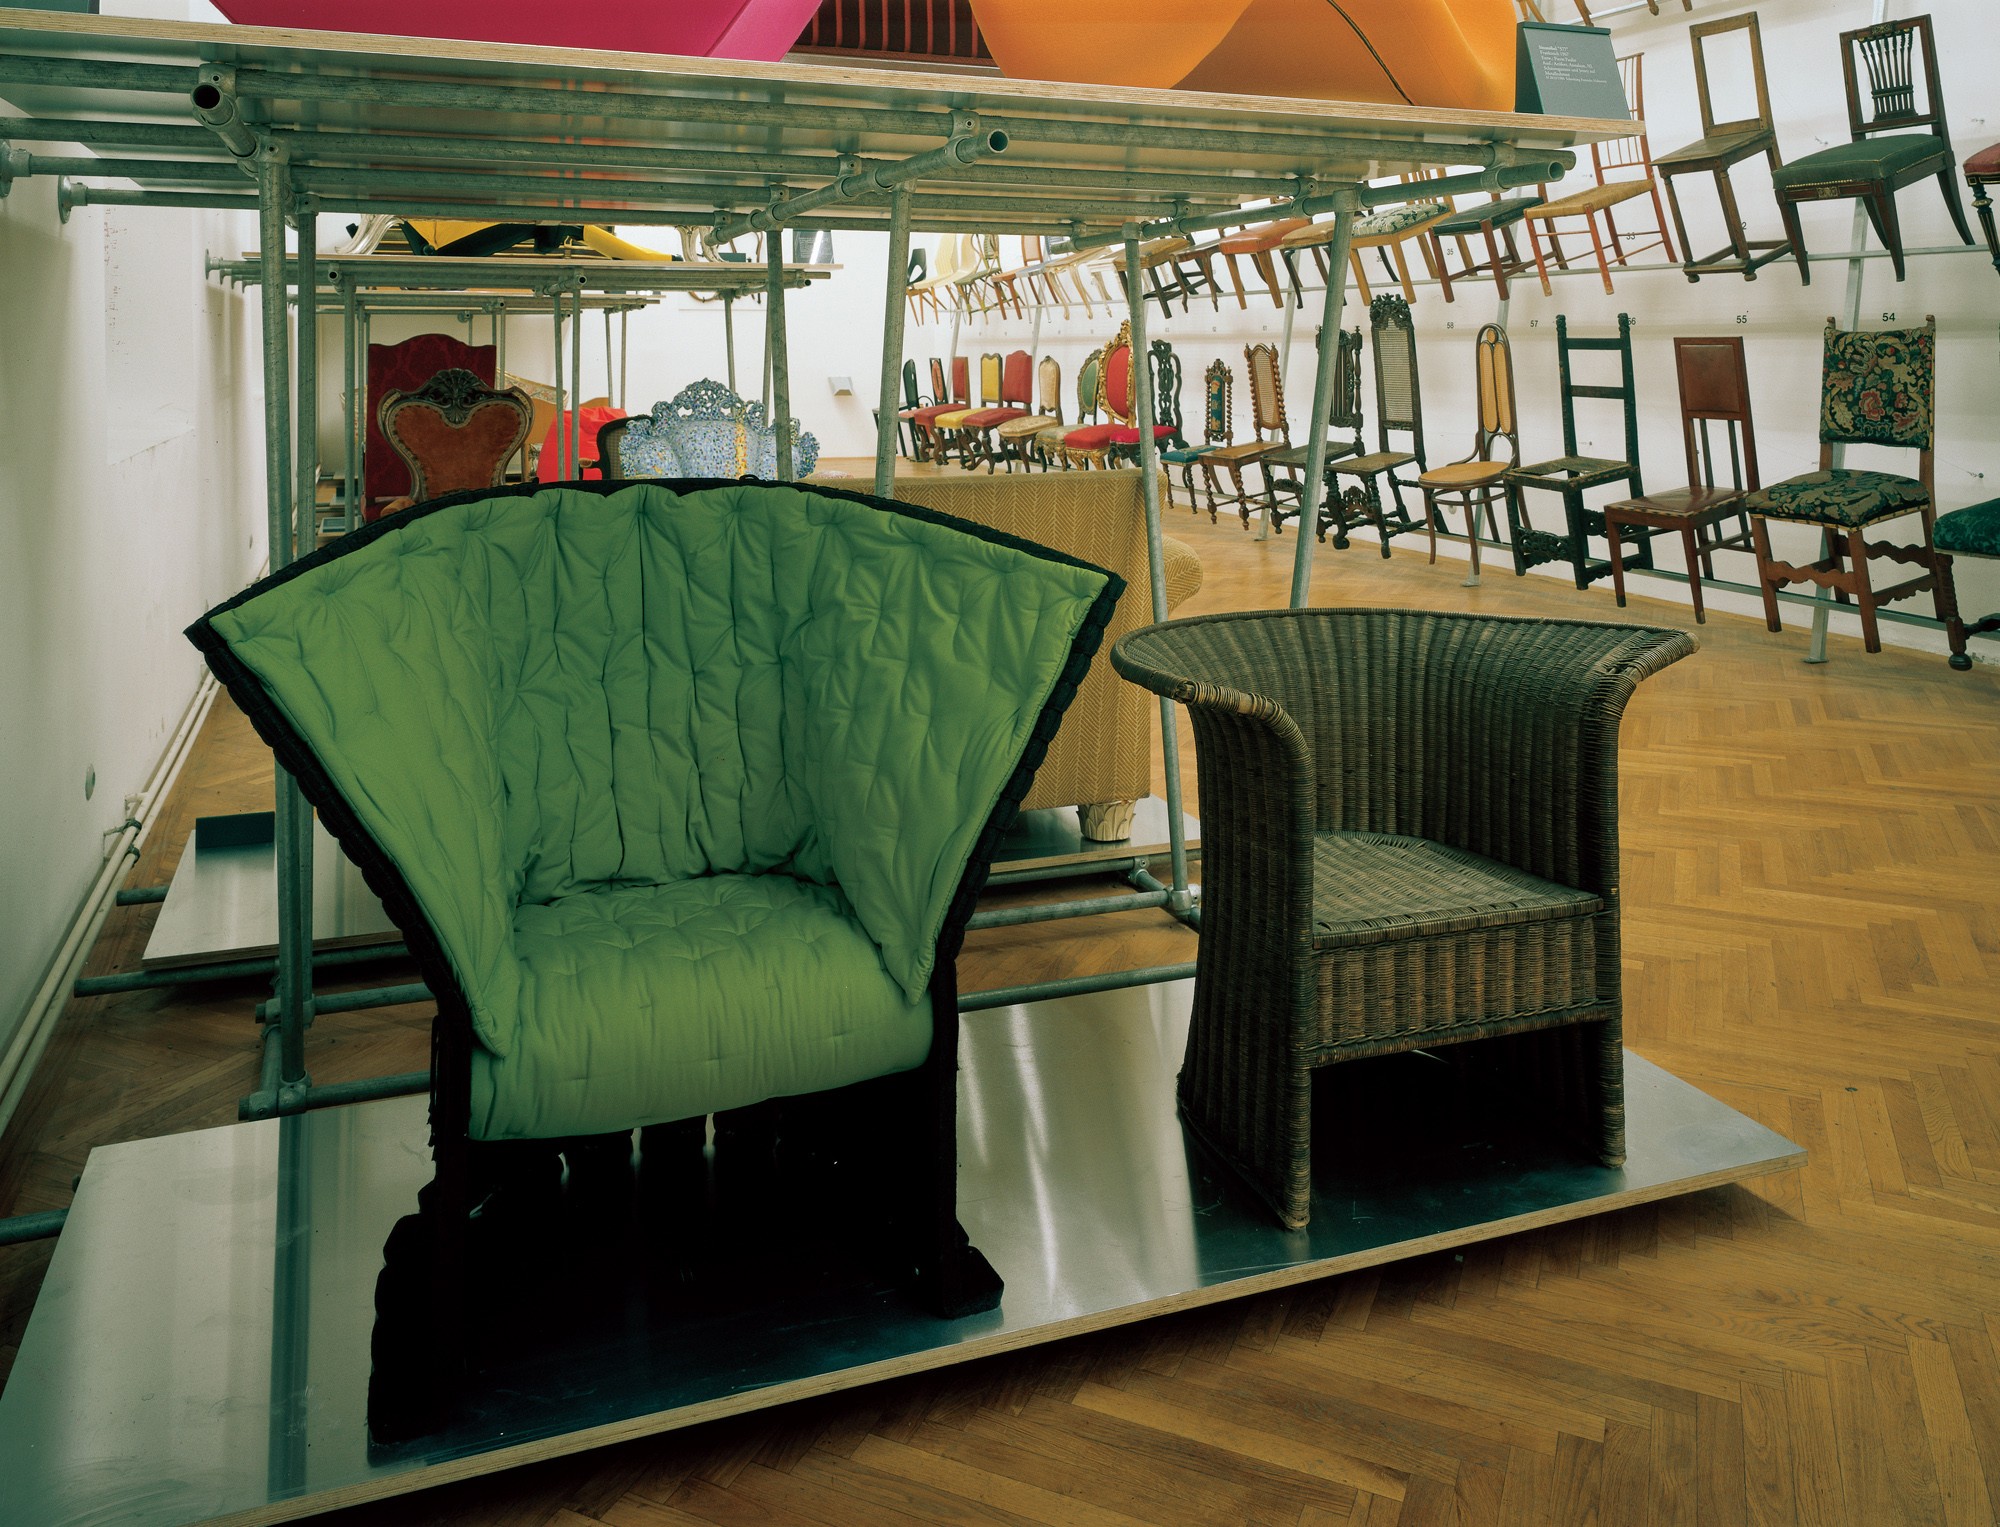 <BODY>Study Collection Seating Furniture</BODY>